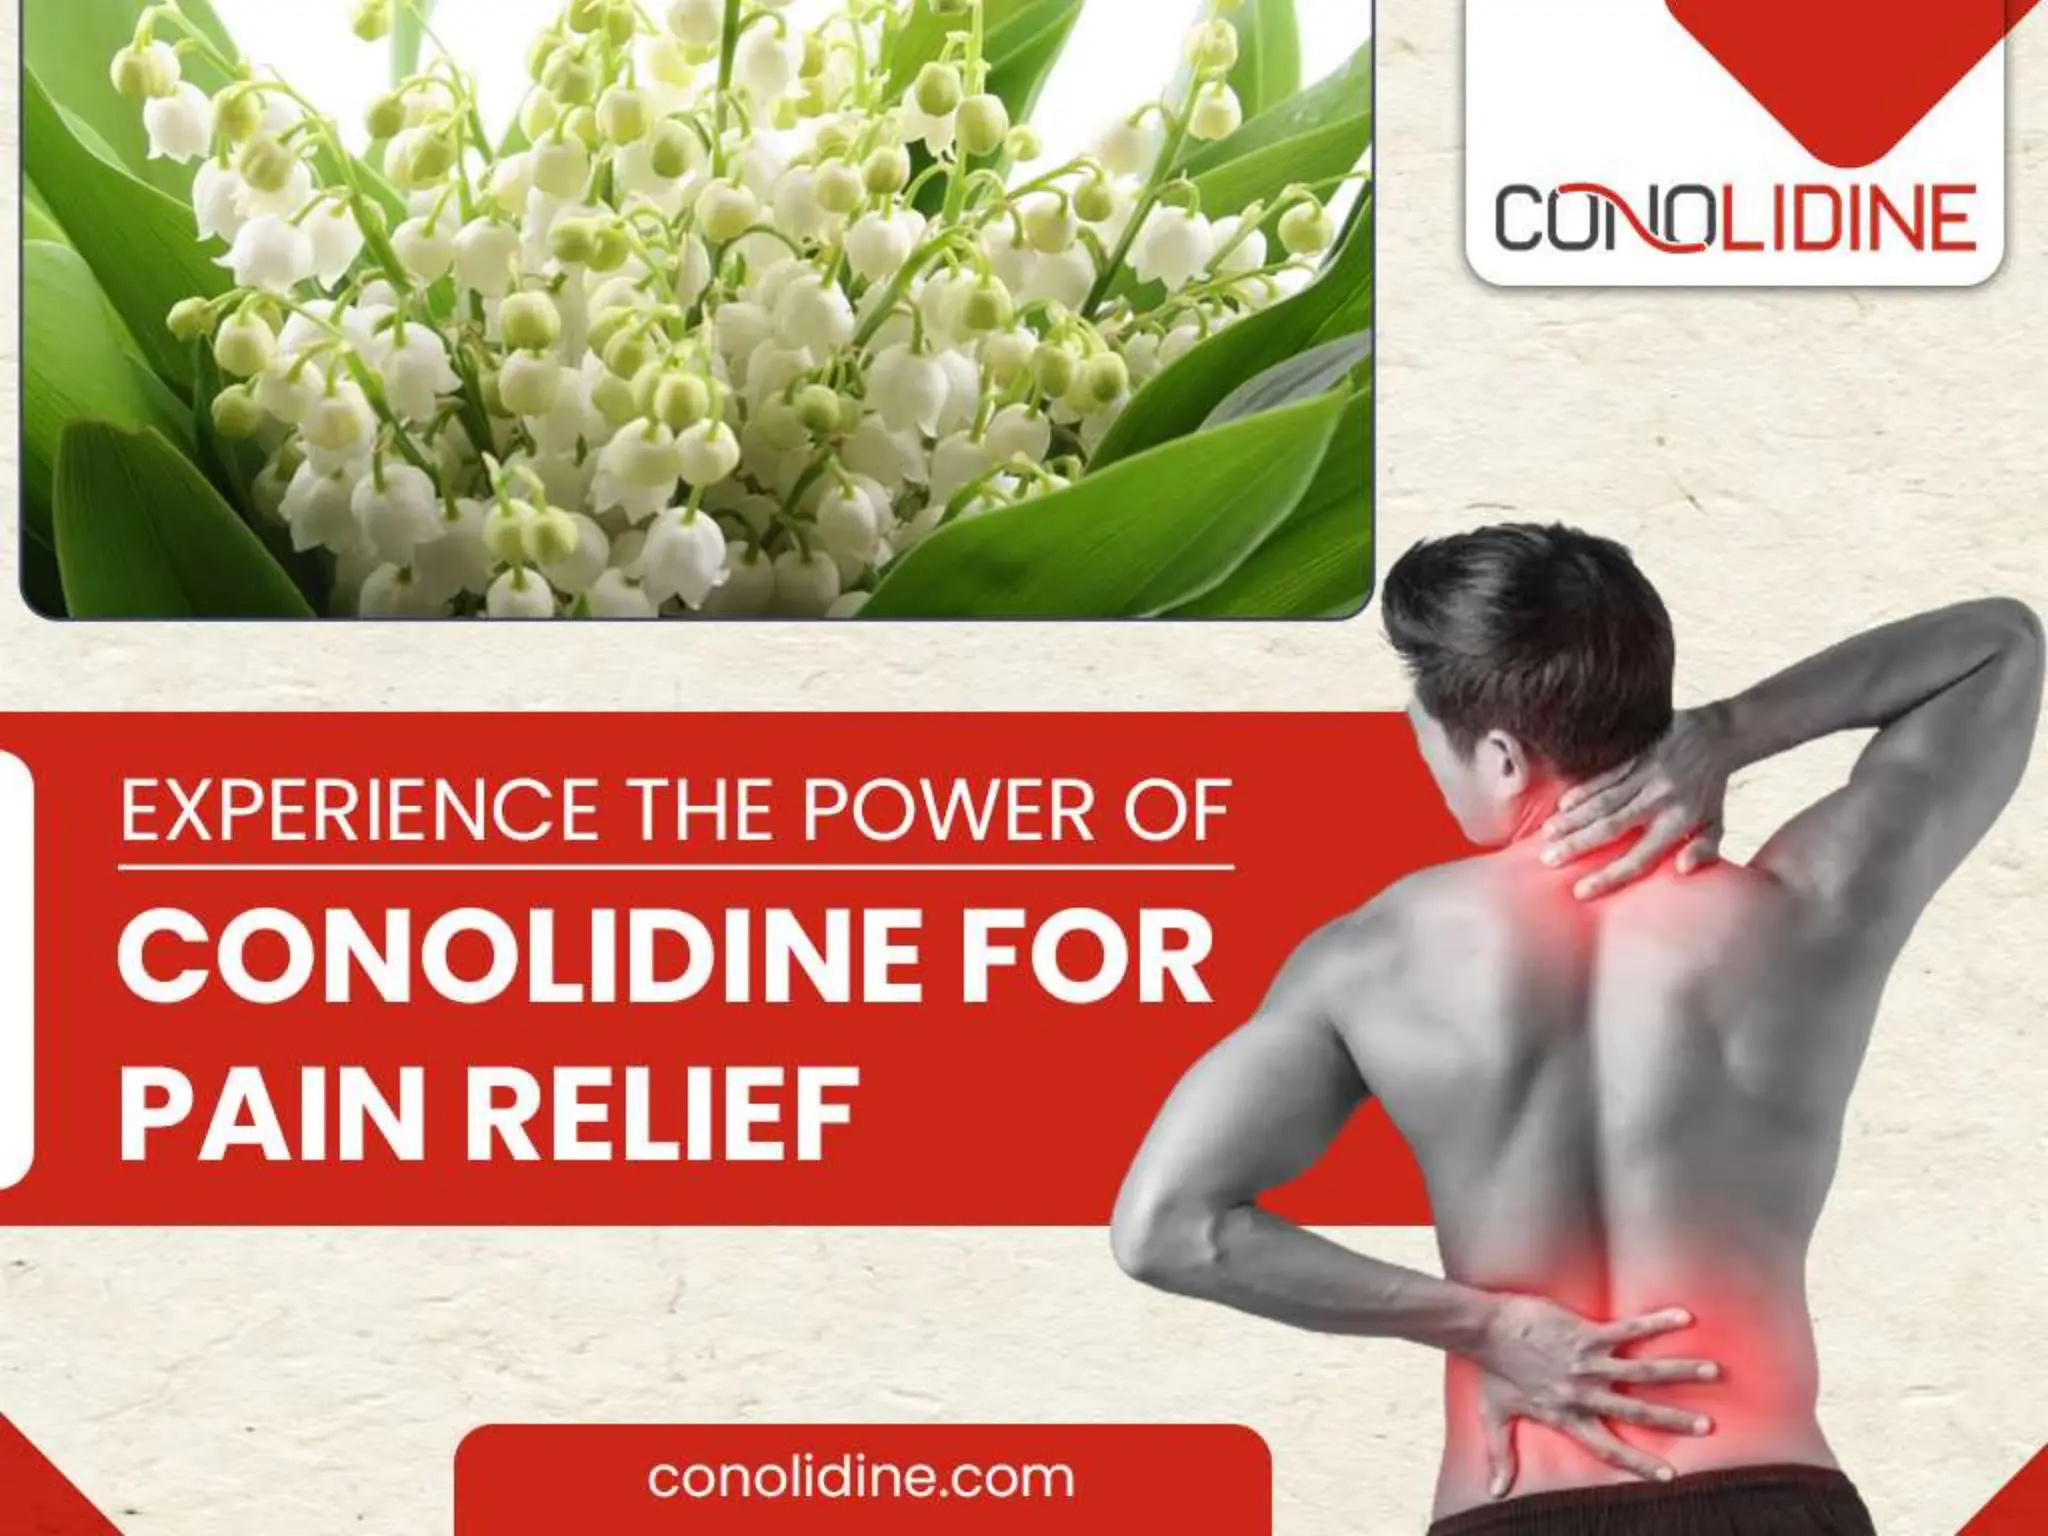 Experience The Power of Conolidine for Pain Relief.